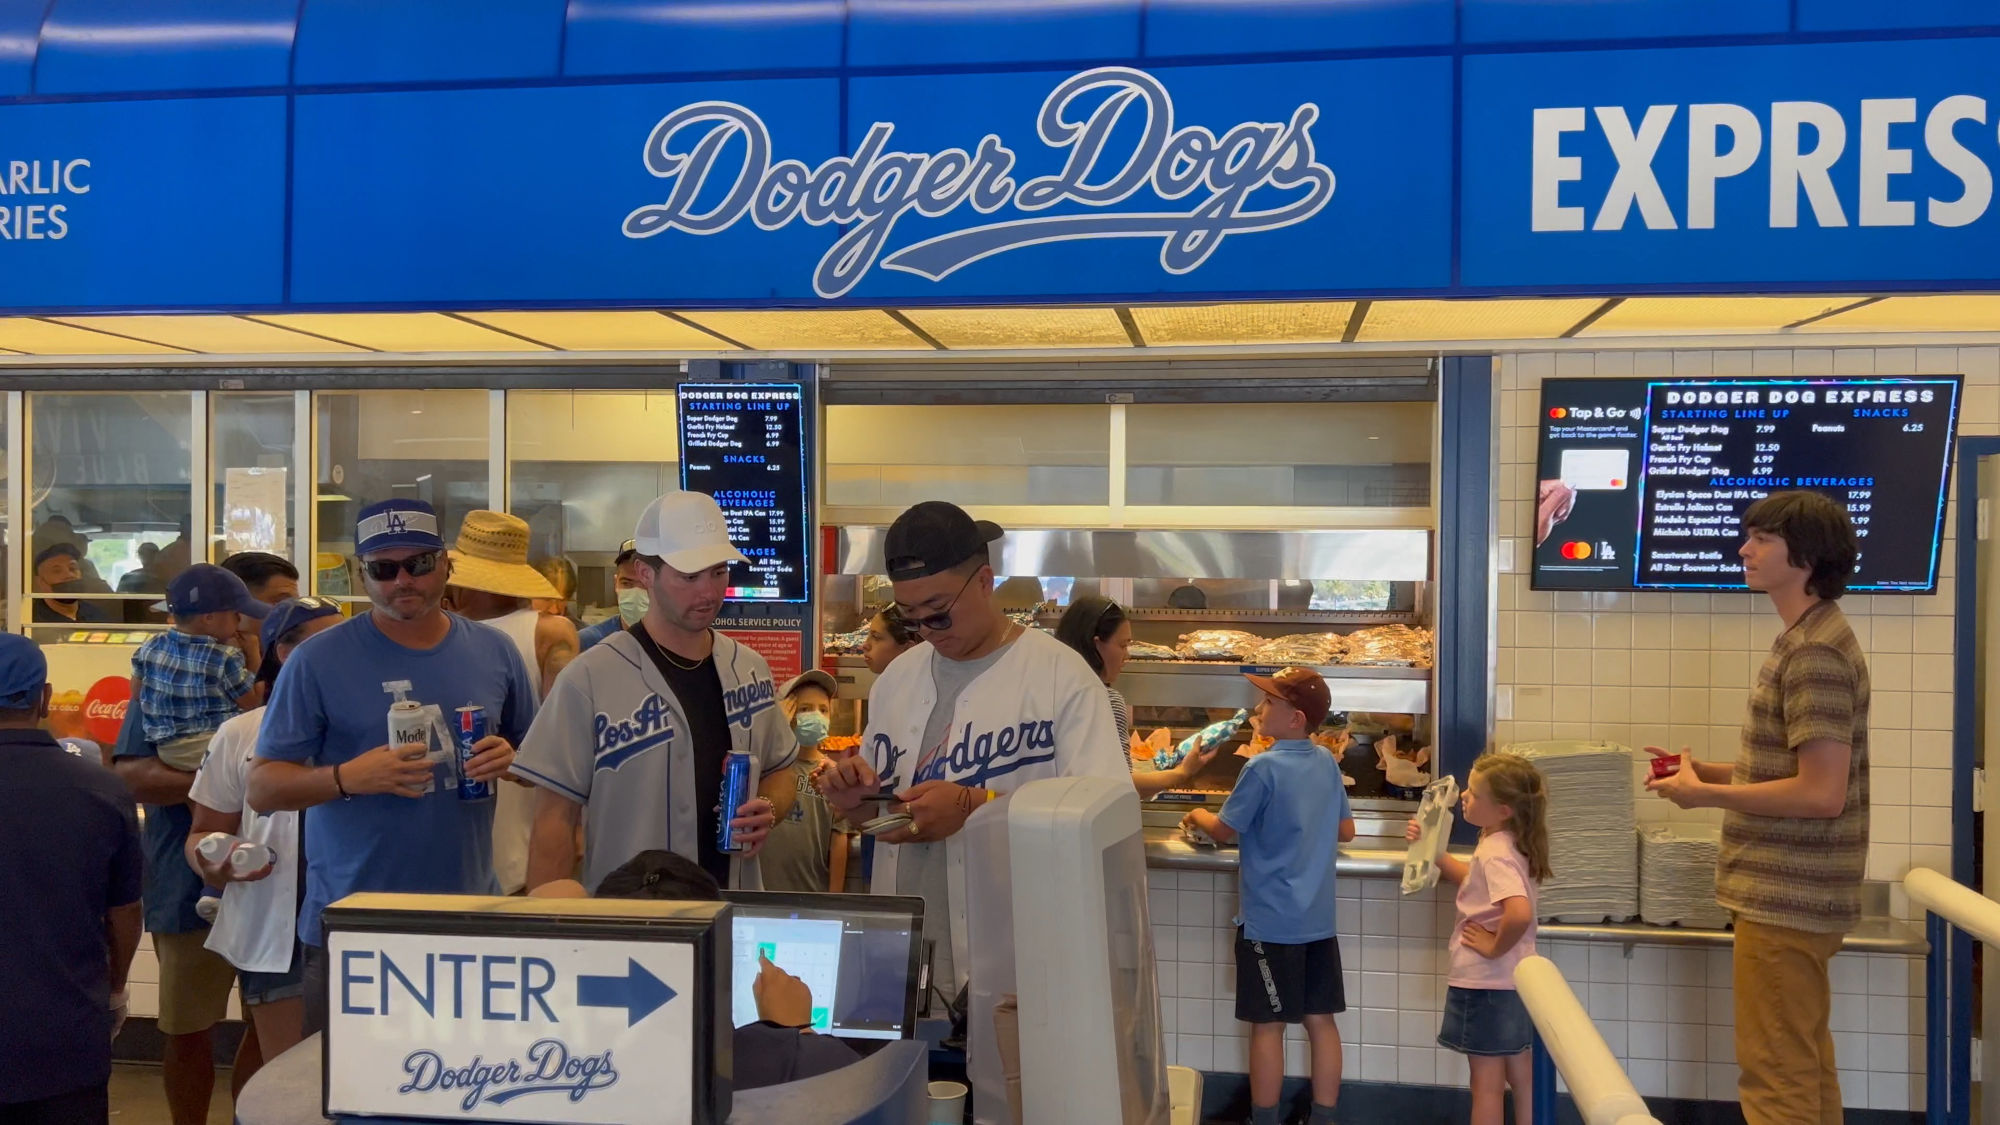 Dodger Dogs Express Section 6